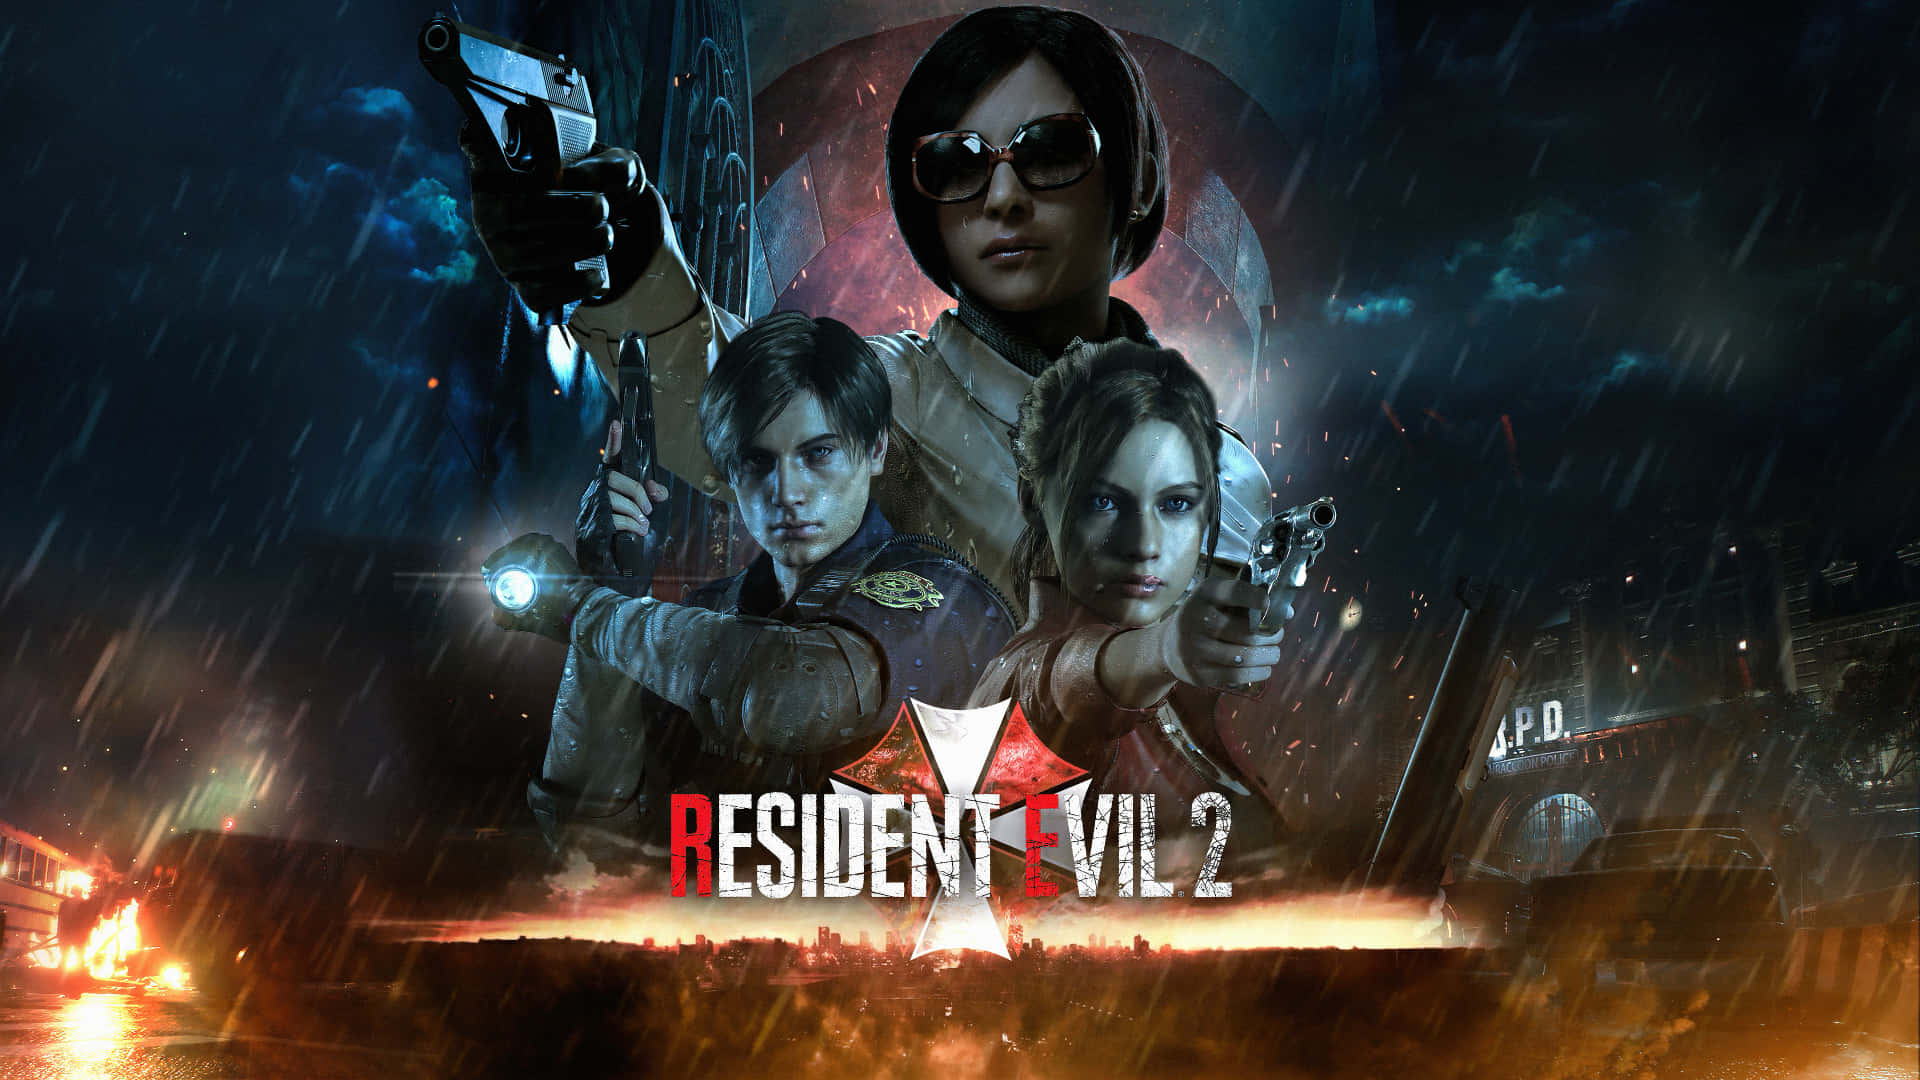 Join the fight against the zombie hordes of Raccoon City